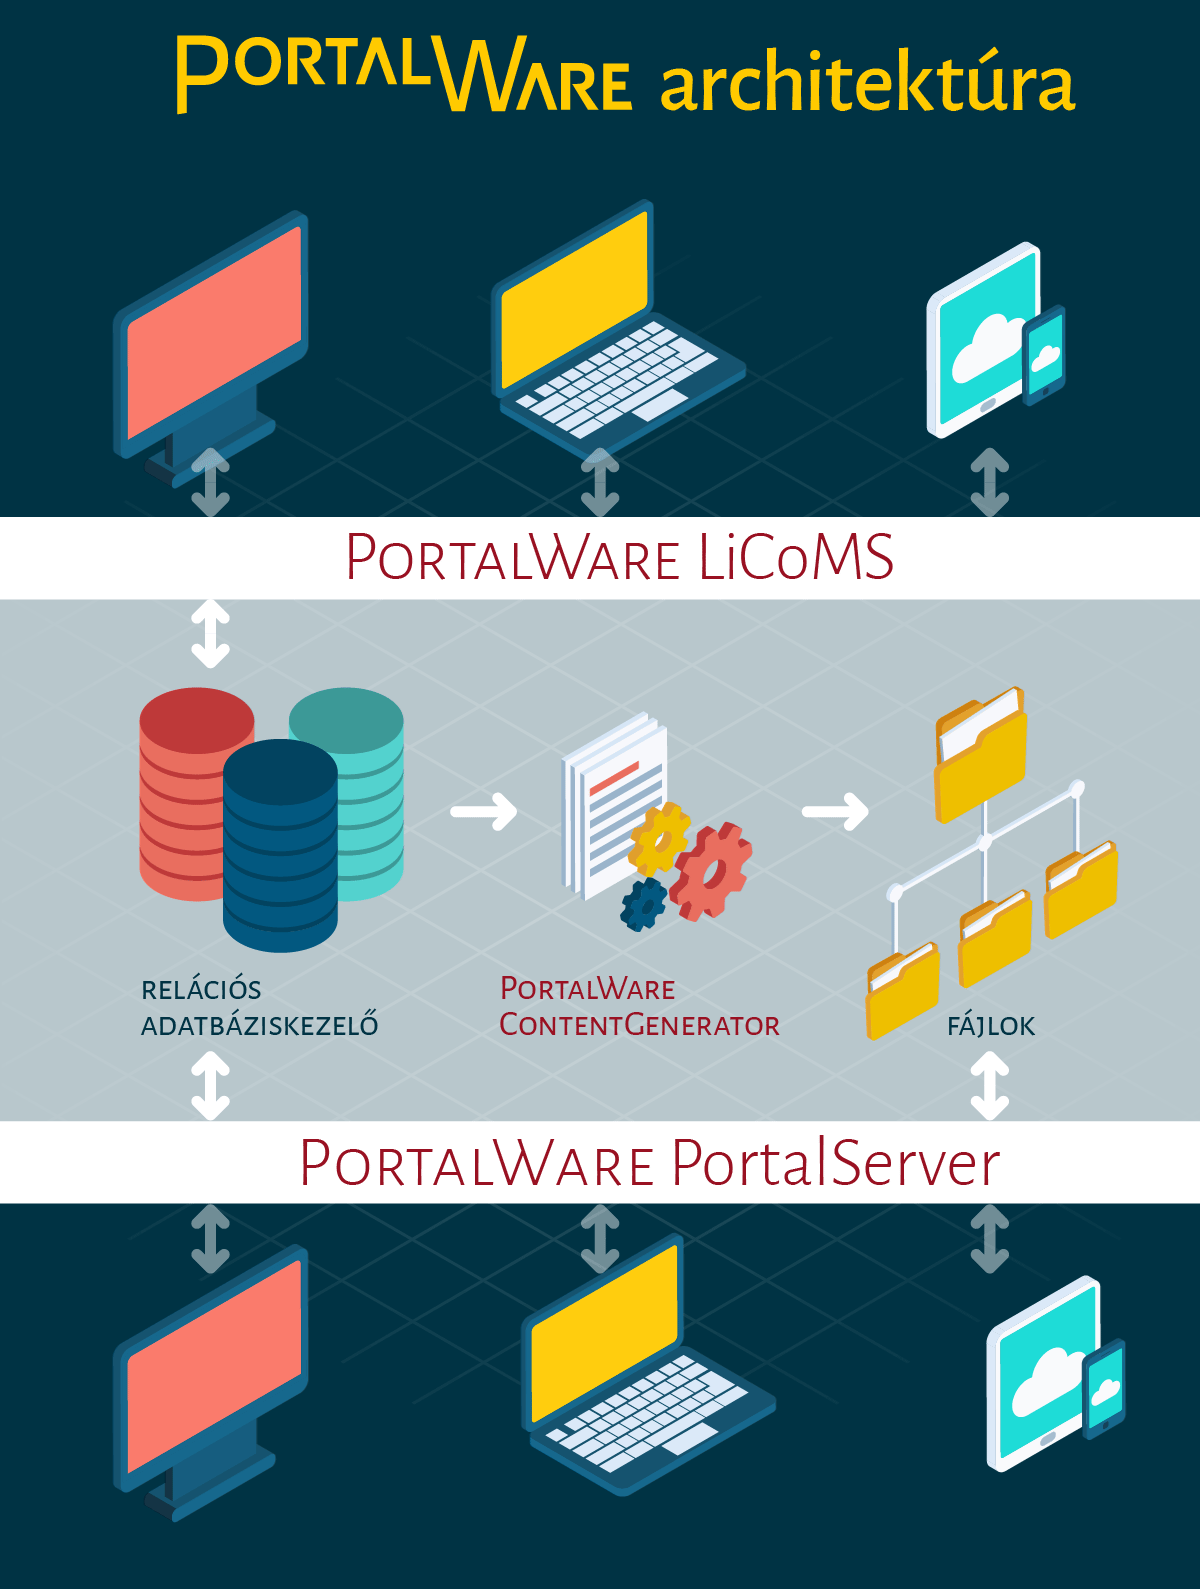 Software architecture of Portalware